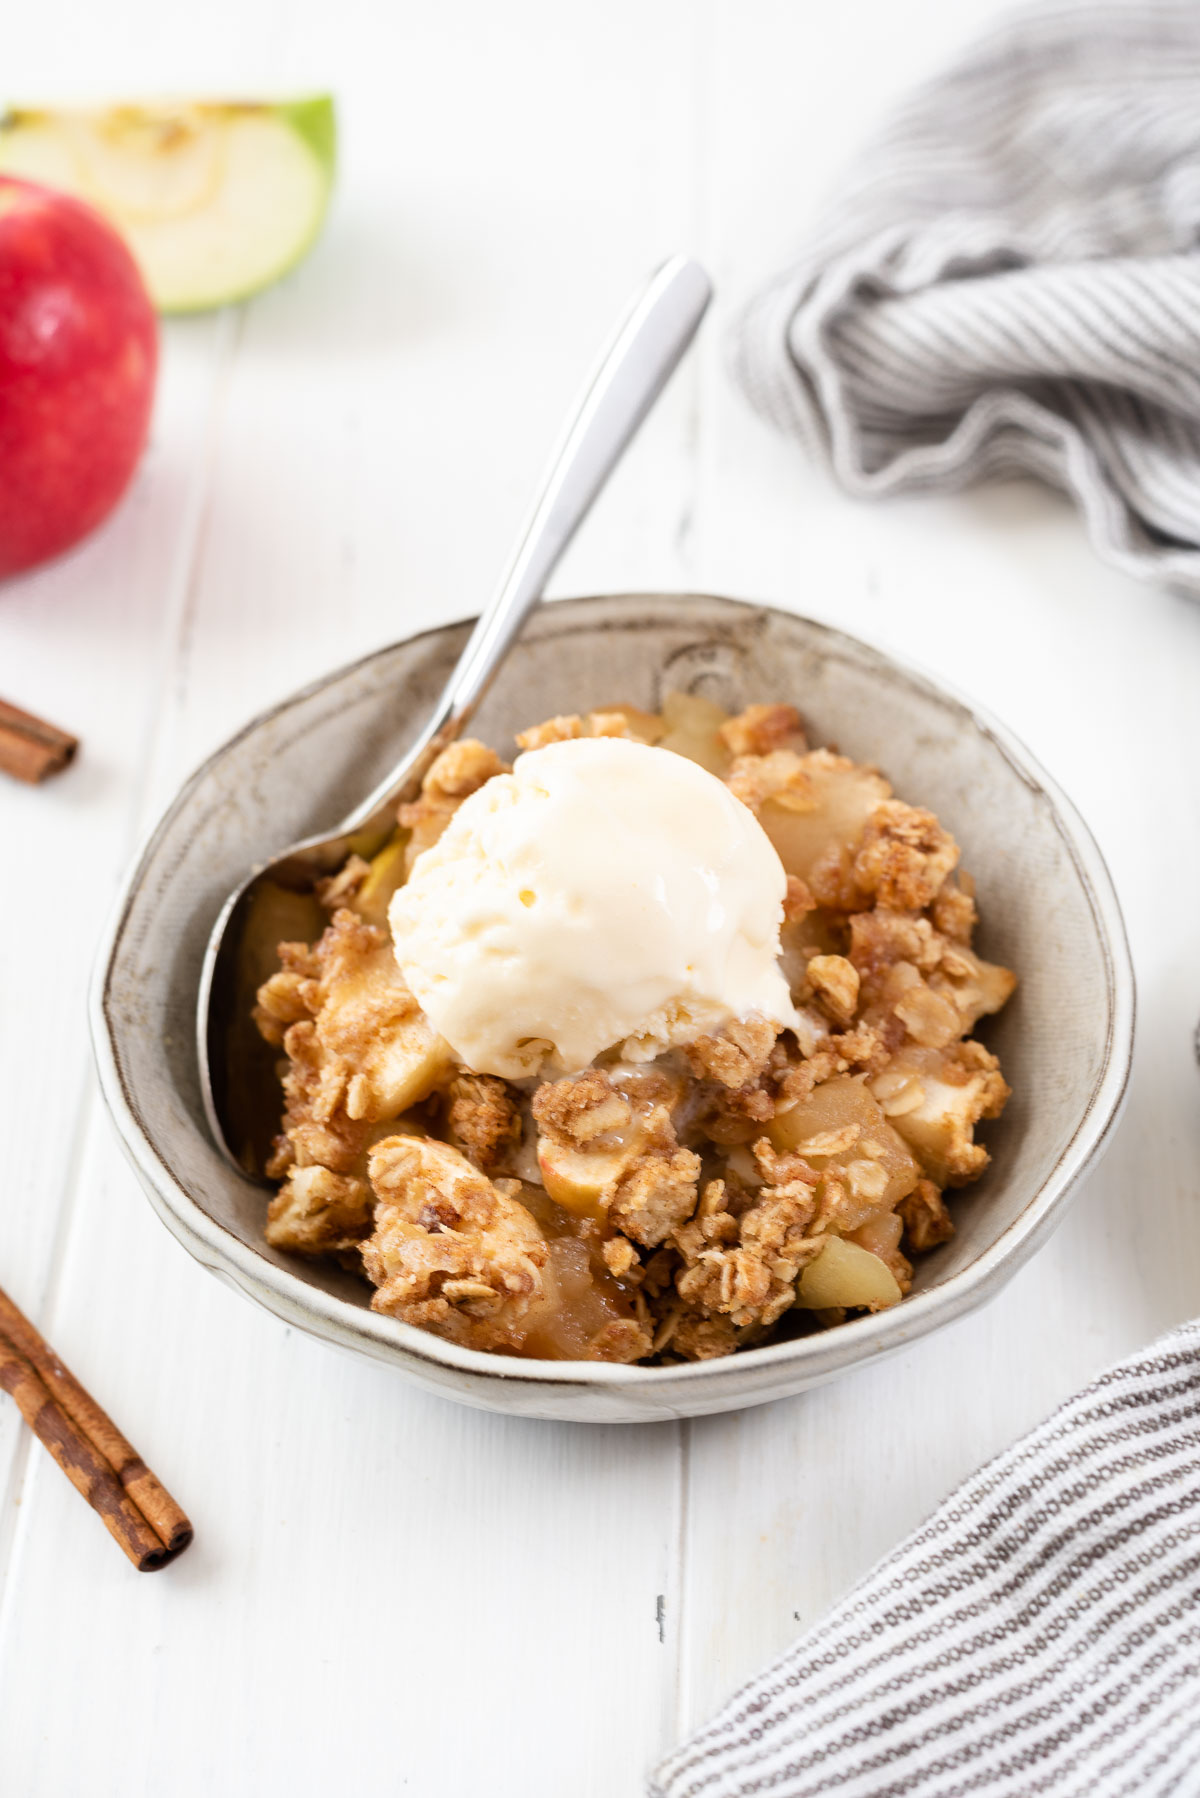 Serving of apple crisp in a bowl with ice cream on top